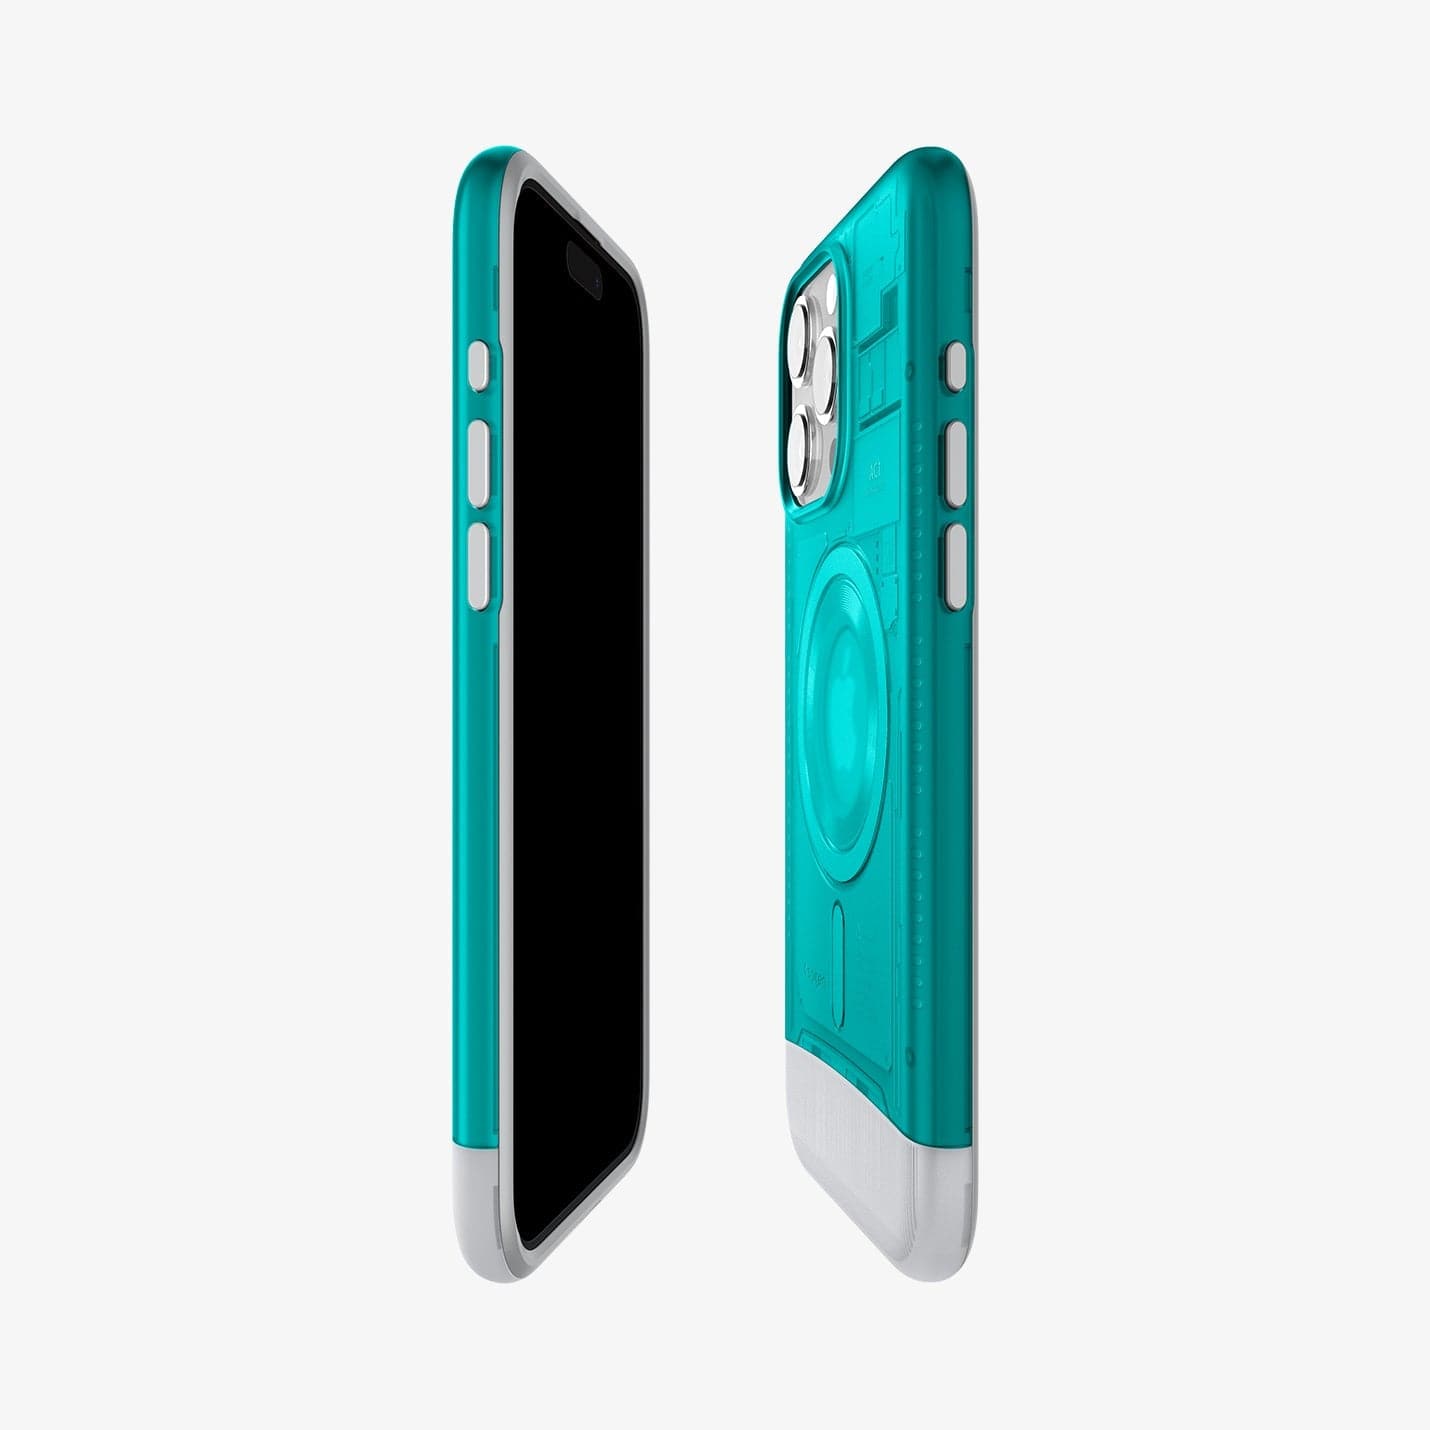 ACS06608 - iPhone 15 Pro Max Case Classic C1 (MagFit) in bondi blue showing the sides, partial front and back